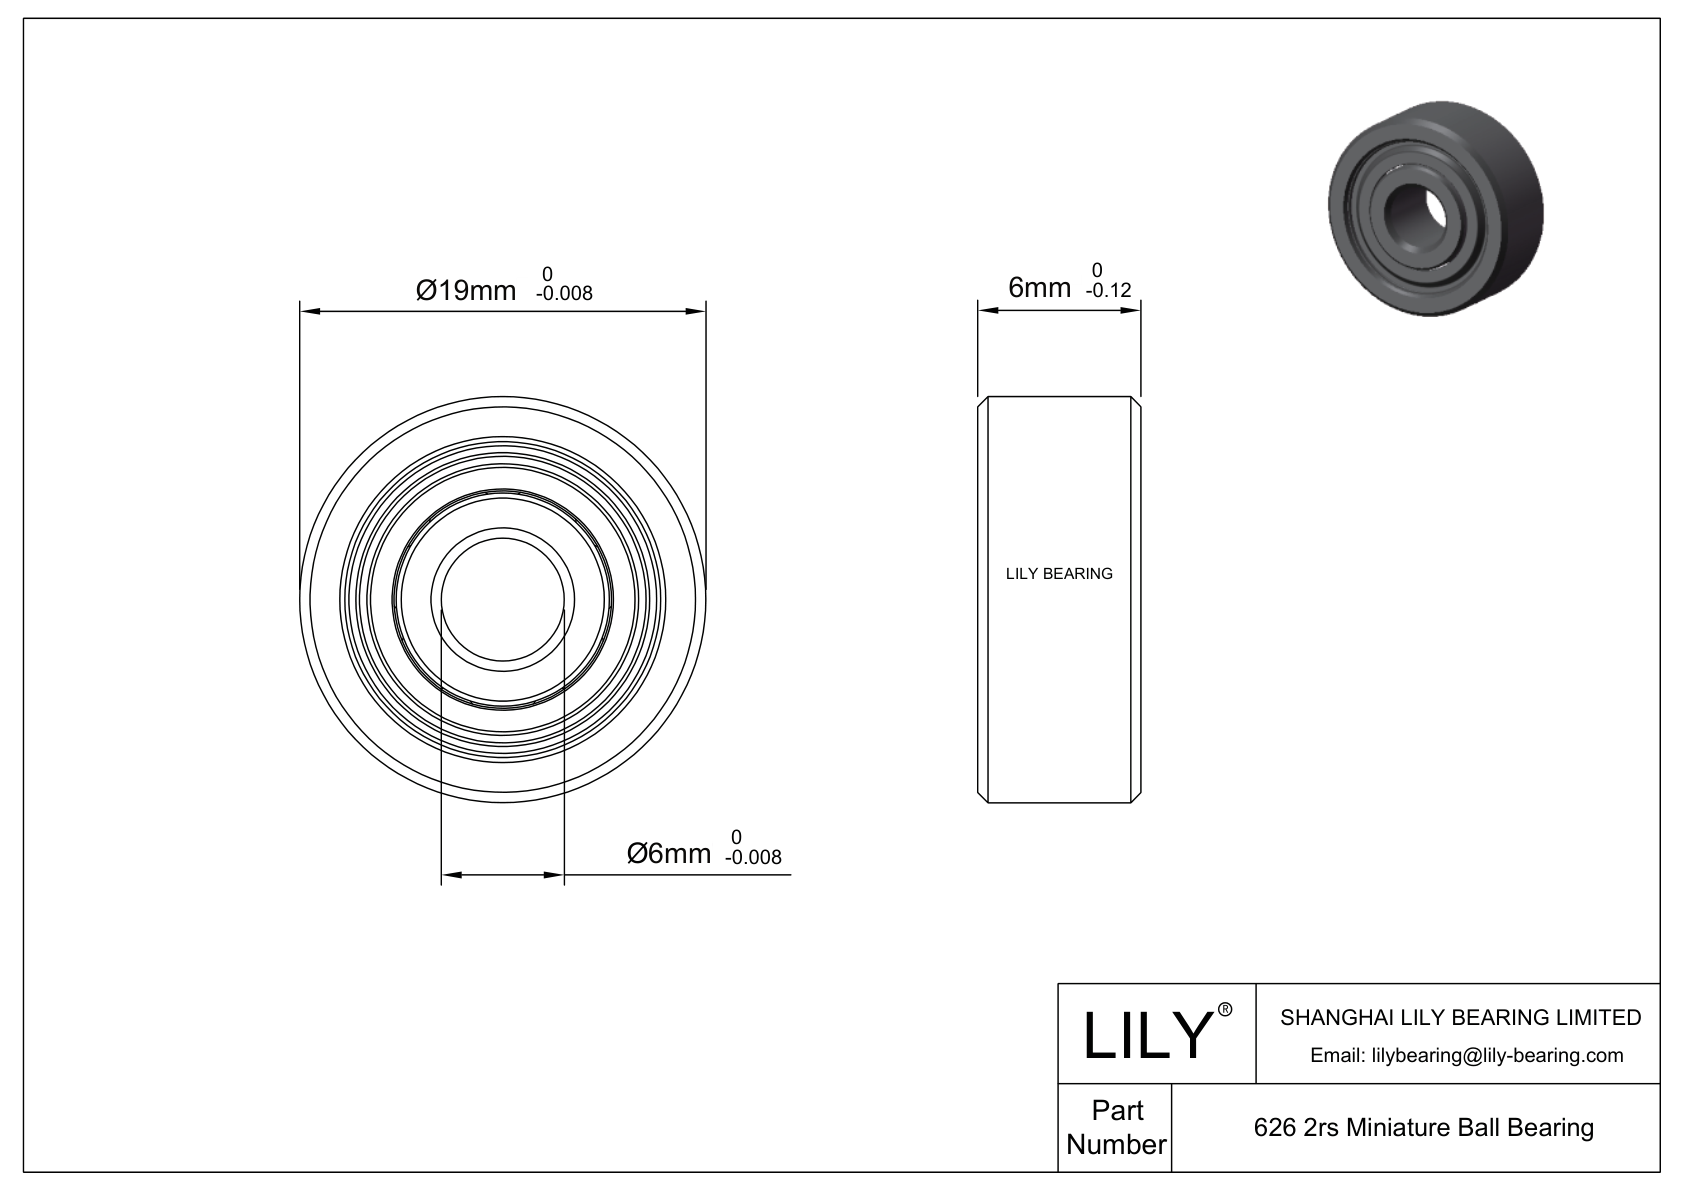 LILY-BS62628-6 POM Coated Bearing cad drawing